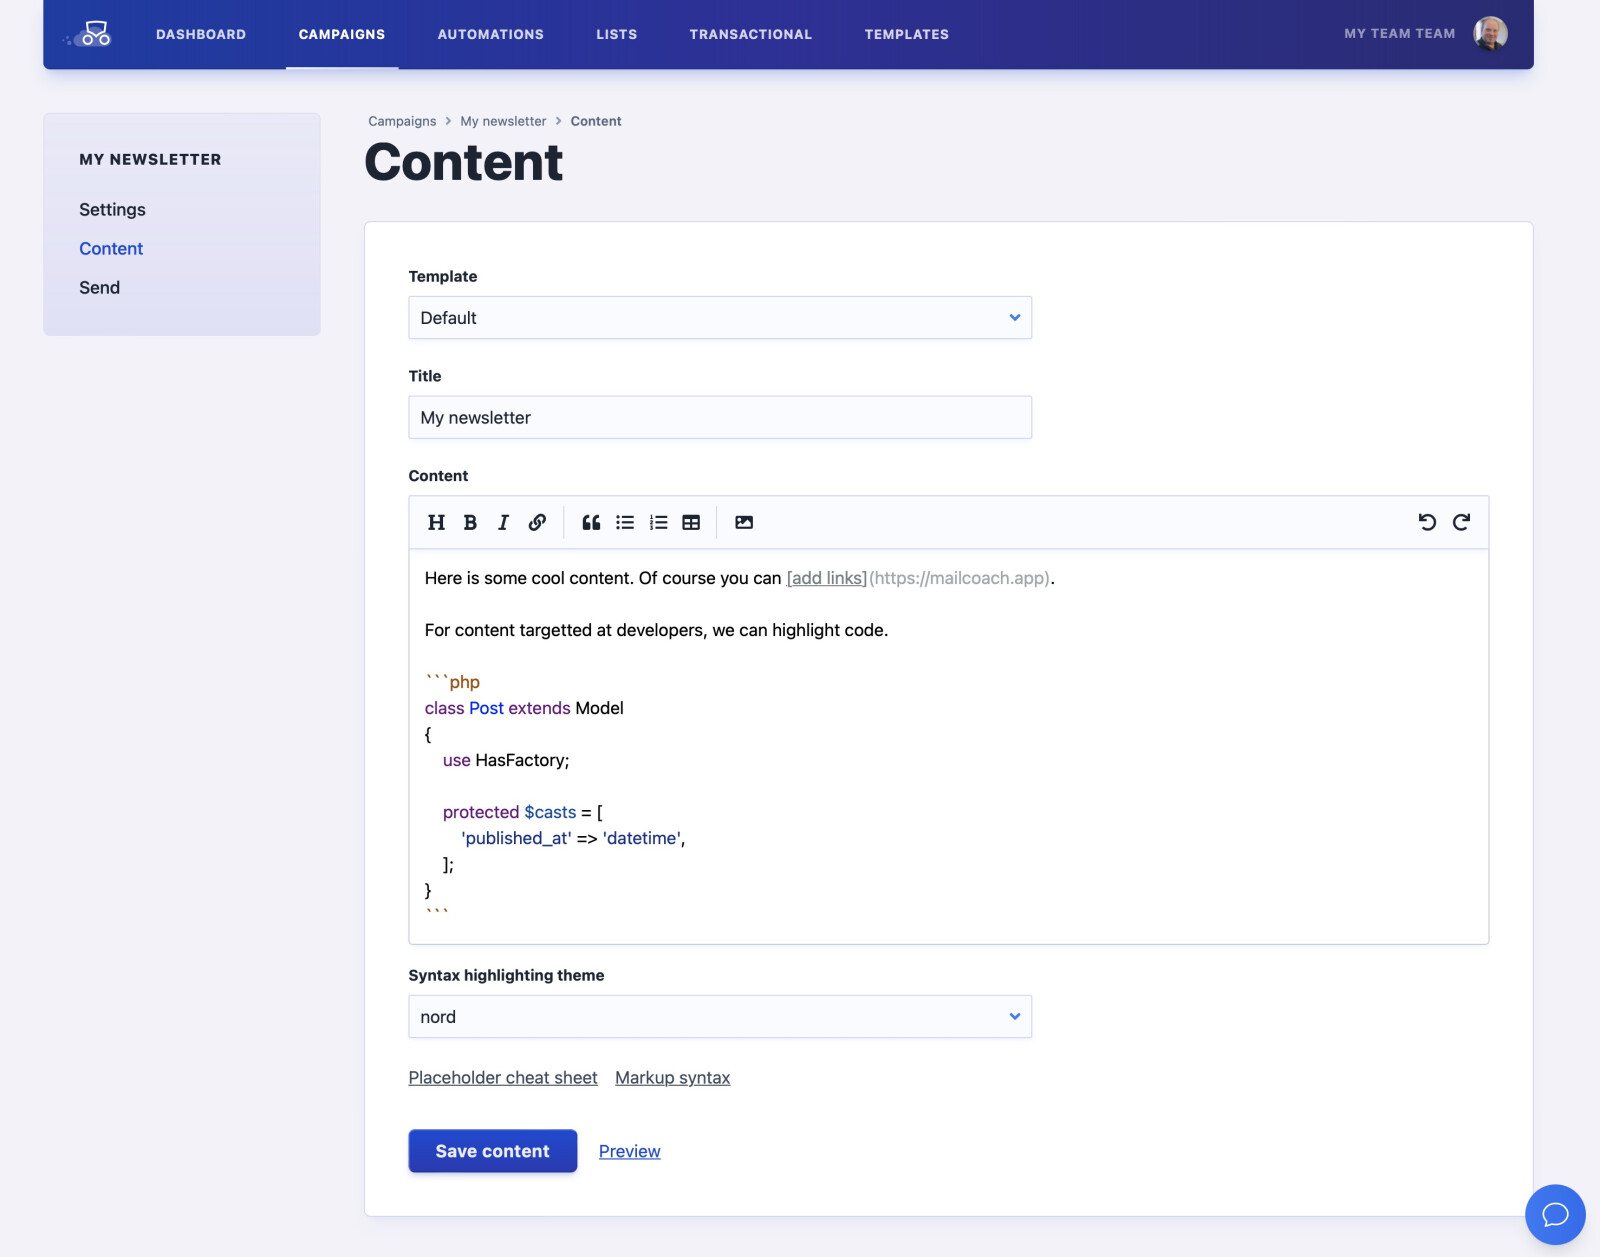 Setting up a new mailer - adding content screen